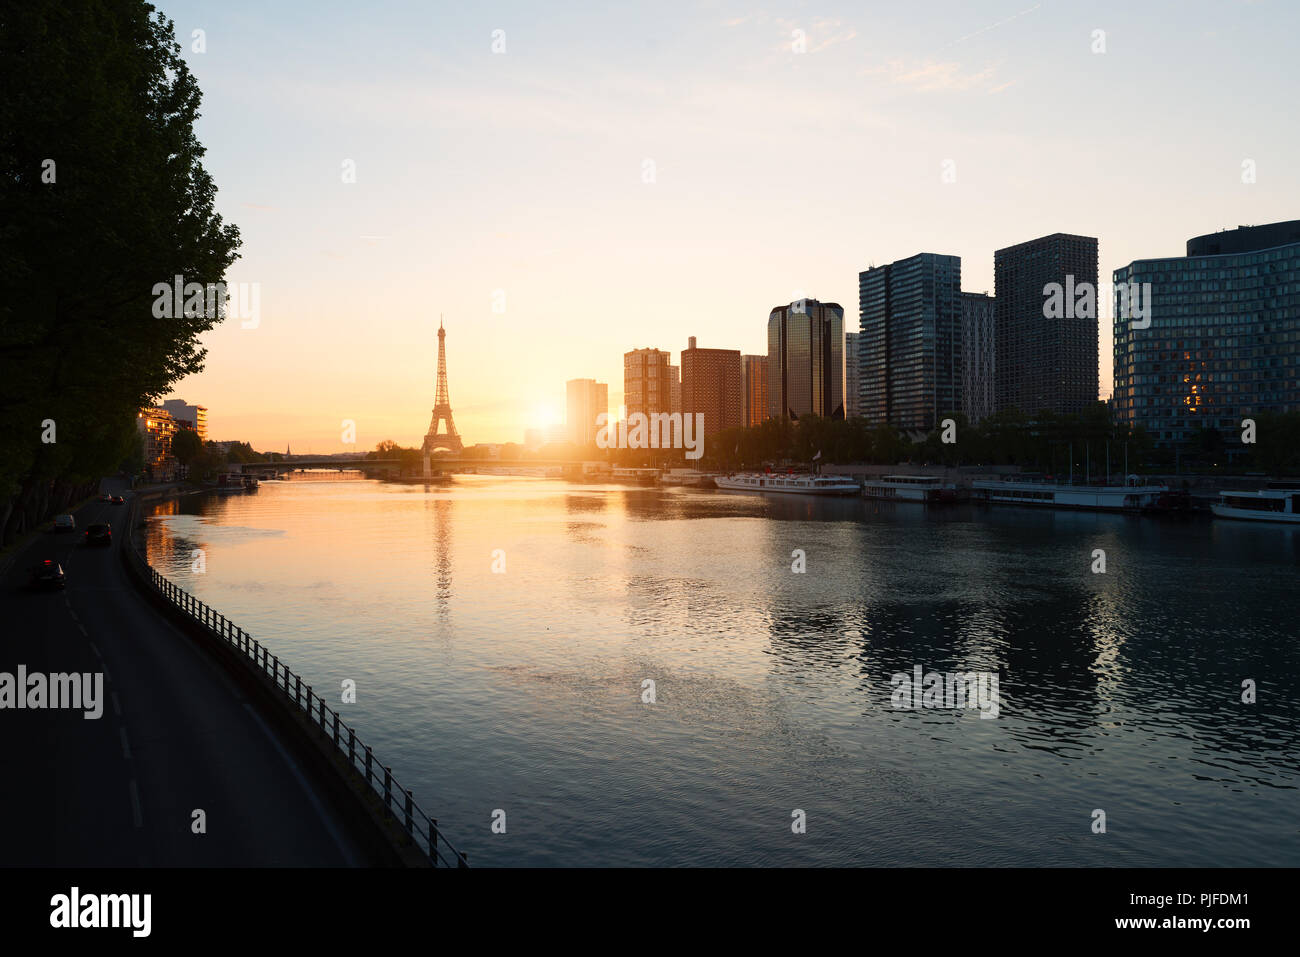 Paris skyline with Eiffel tower and Seine river in Paris, France. Stock Photo